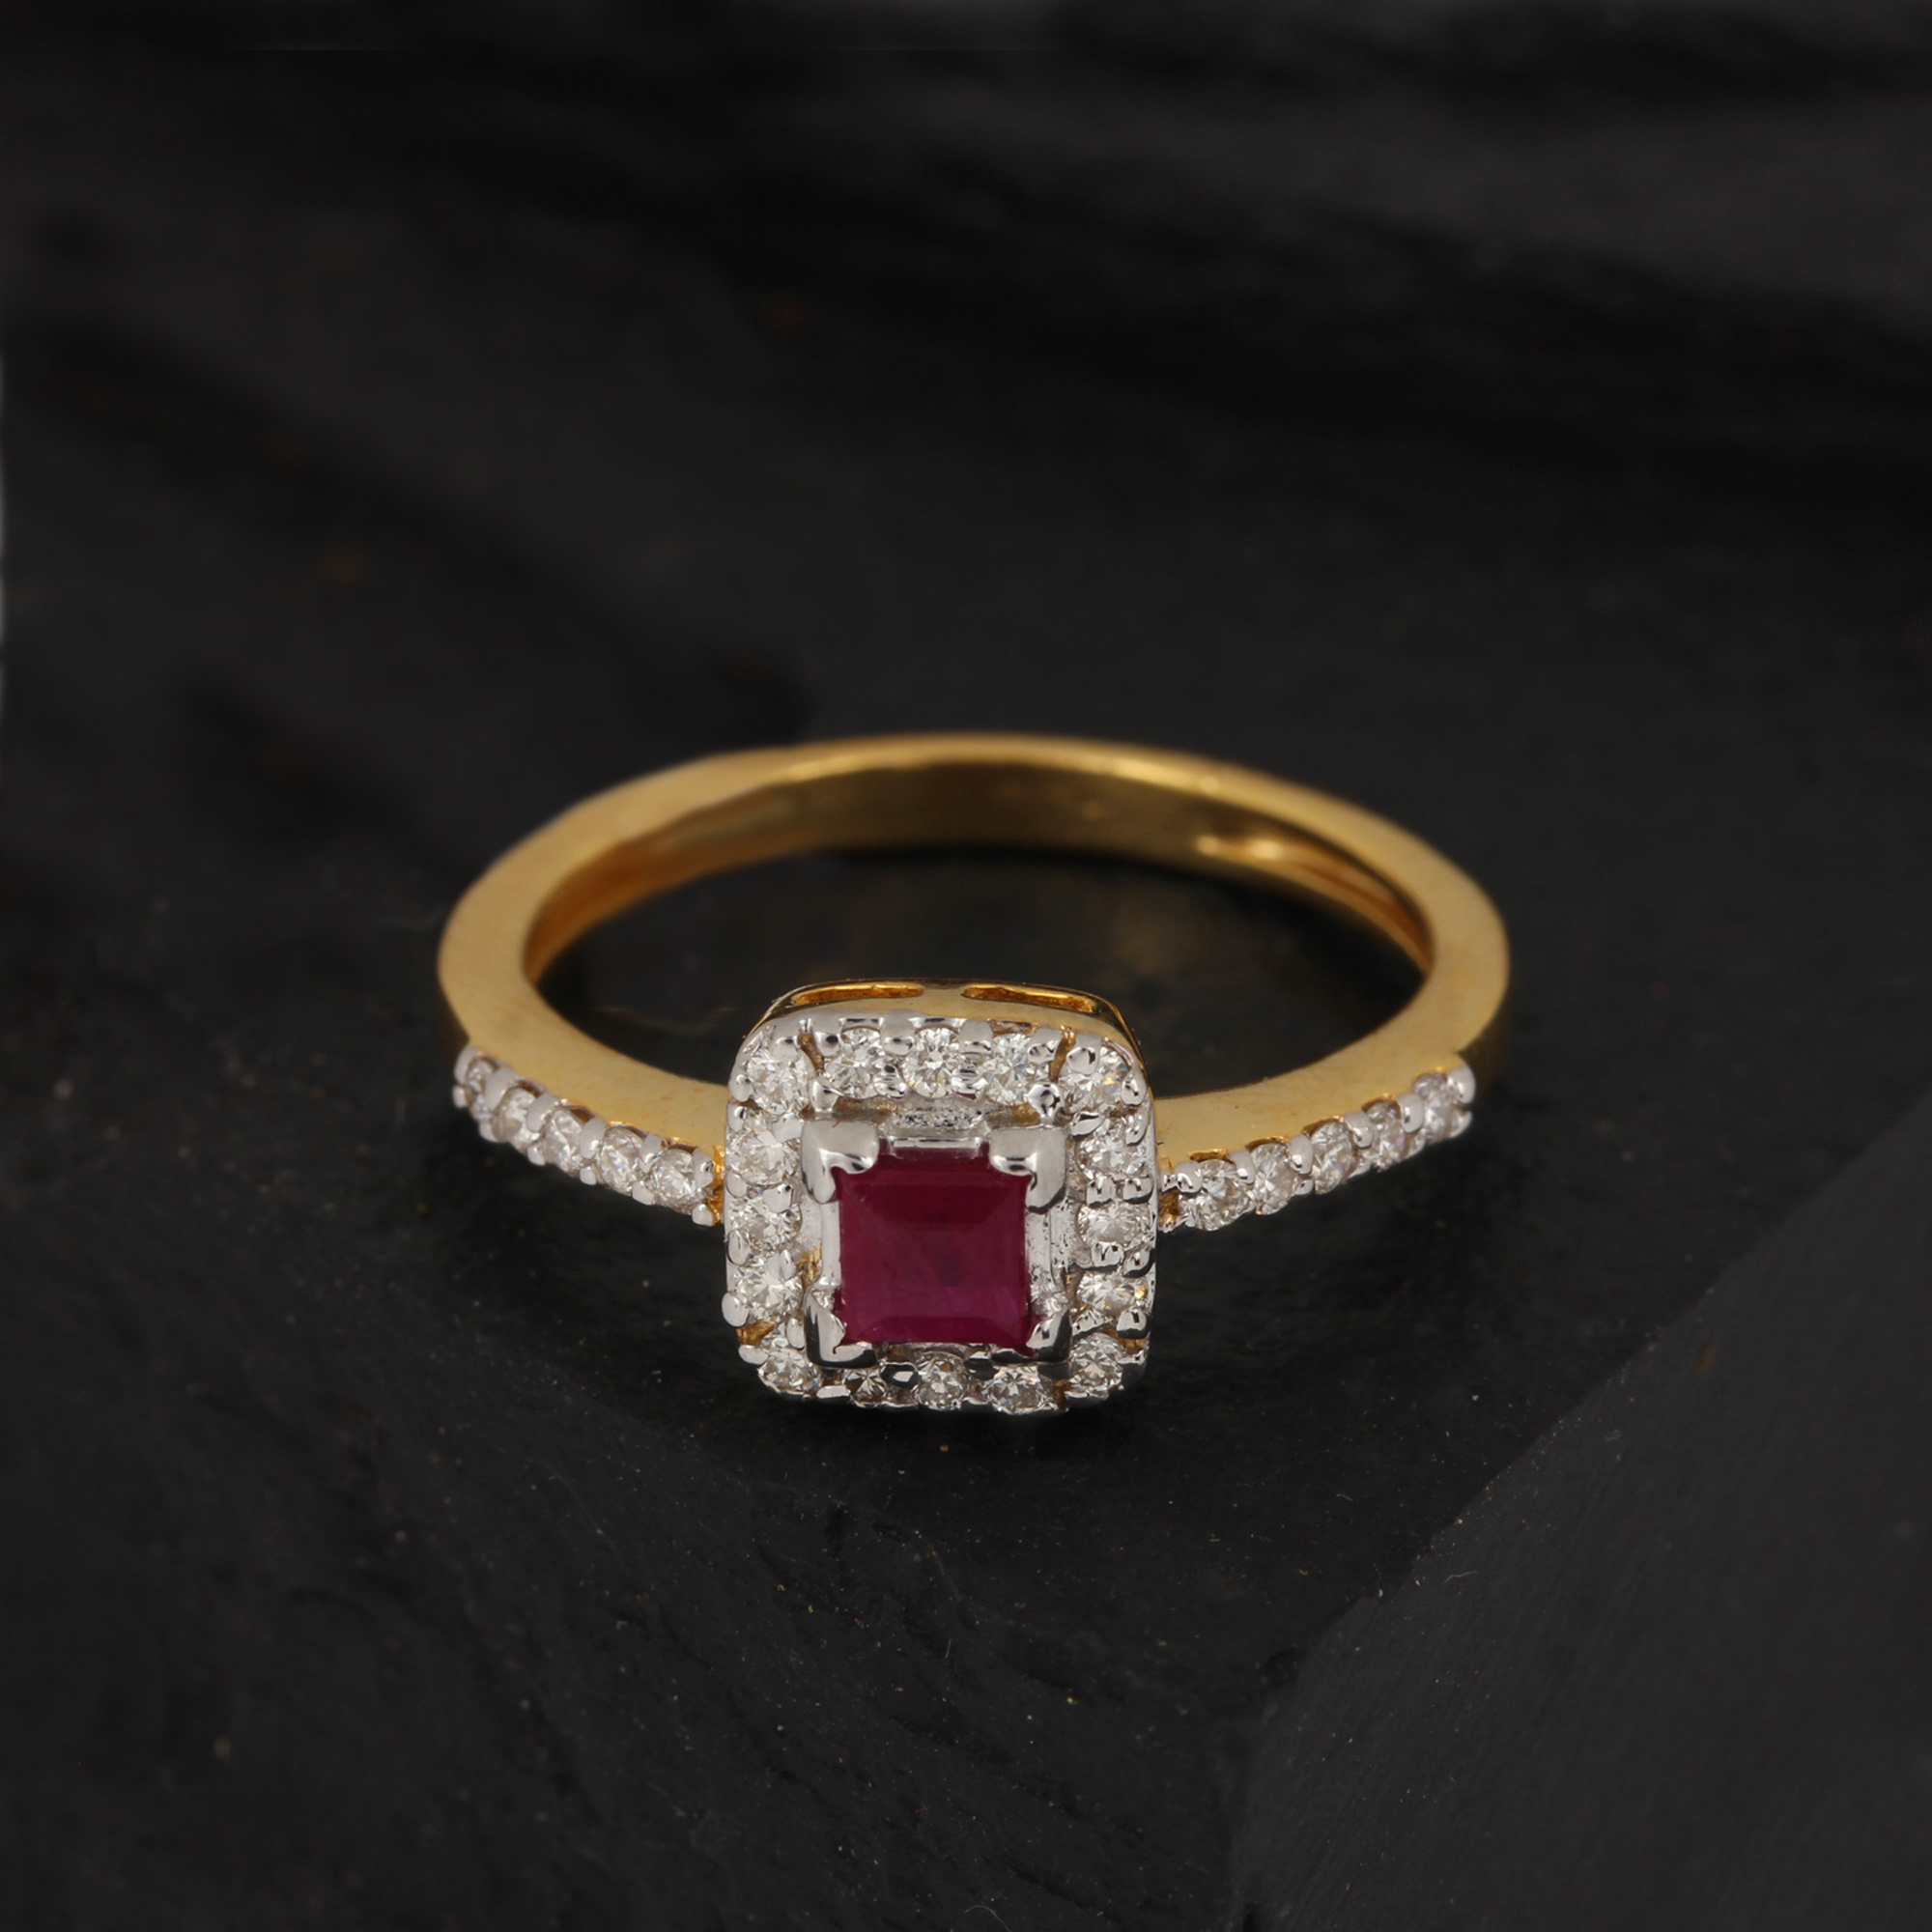 Solid Gold Ring With Diamond And Ruby